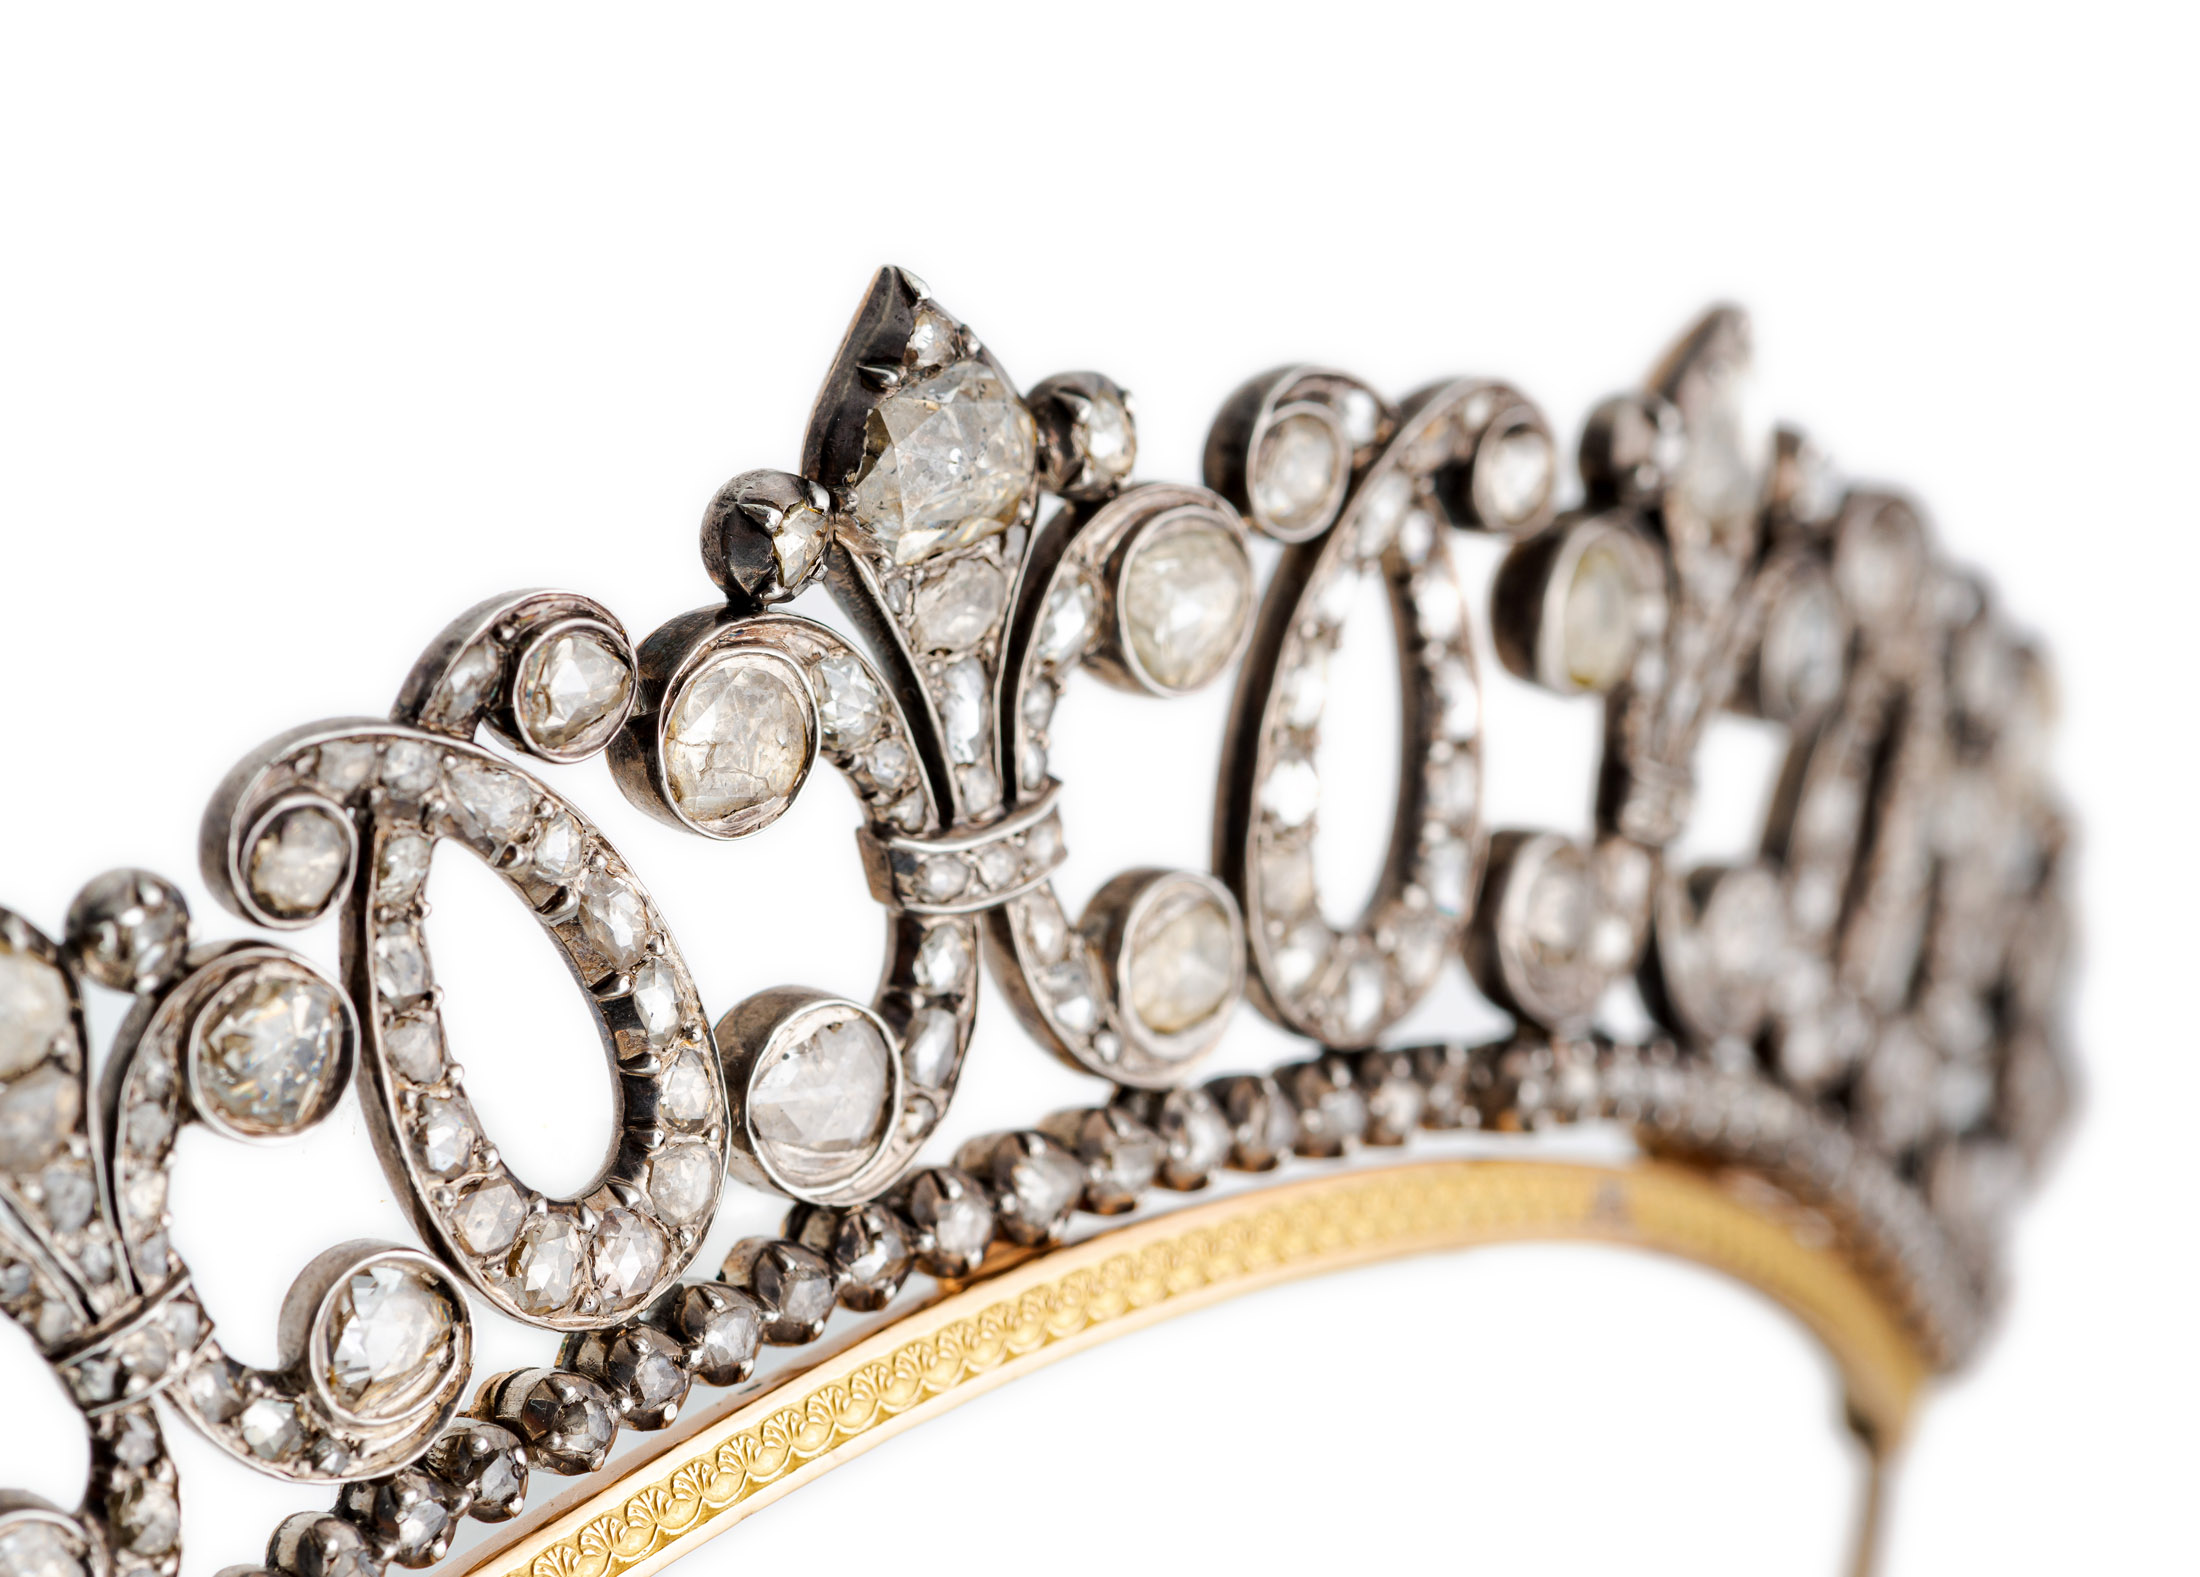 AN EXTREMELY RARE CLASSICAL TIARA WITH DIAMONDS - Image 4 of 8